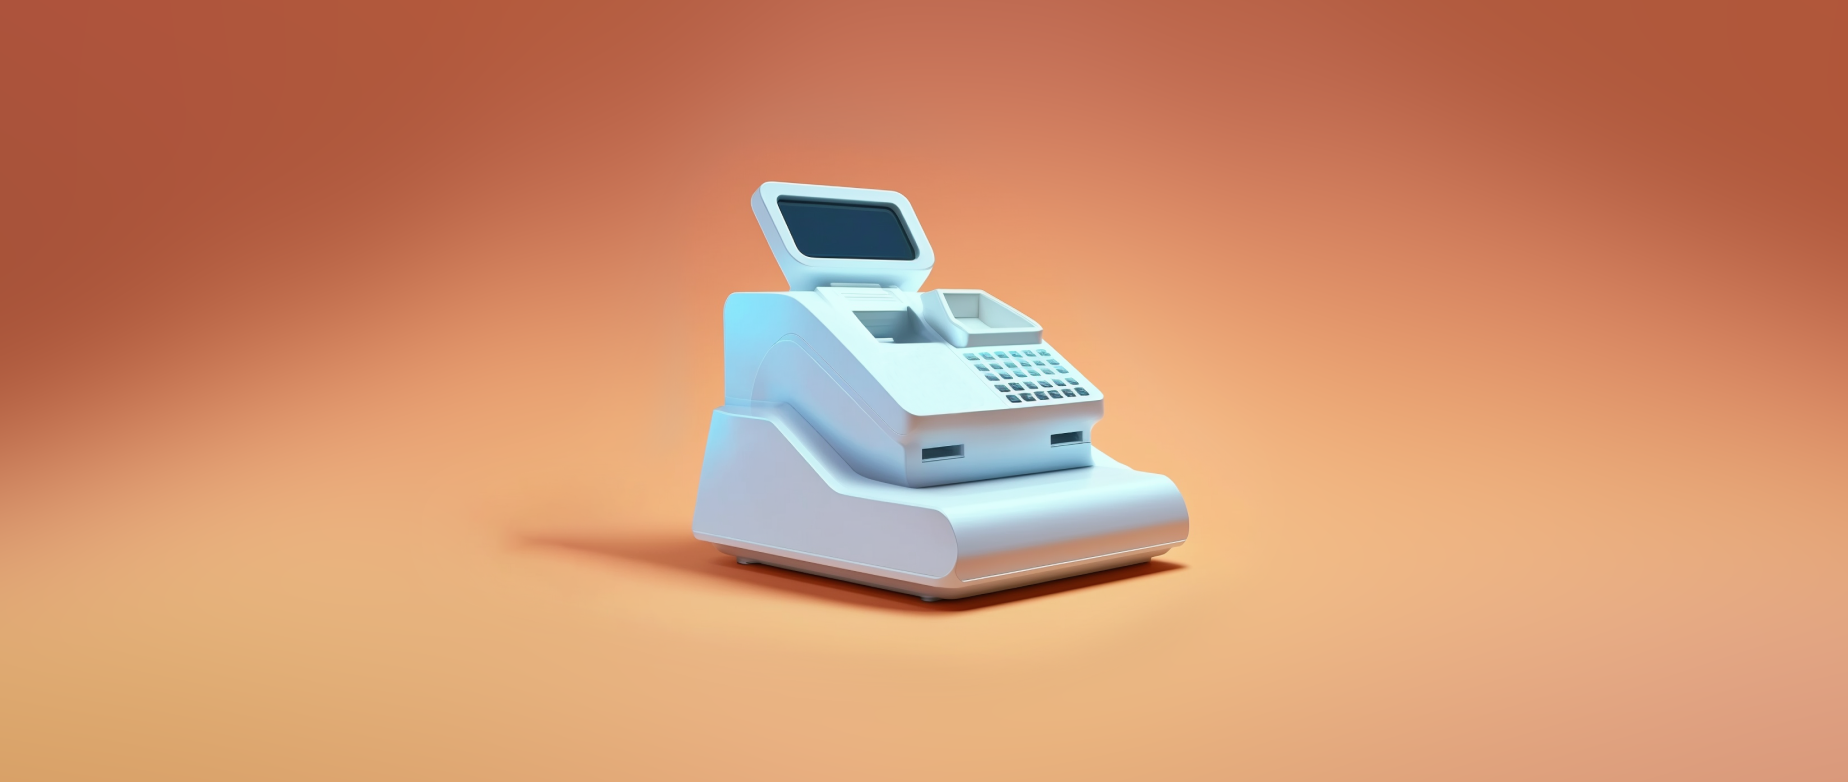 Image for blog post about cashier registers